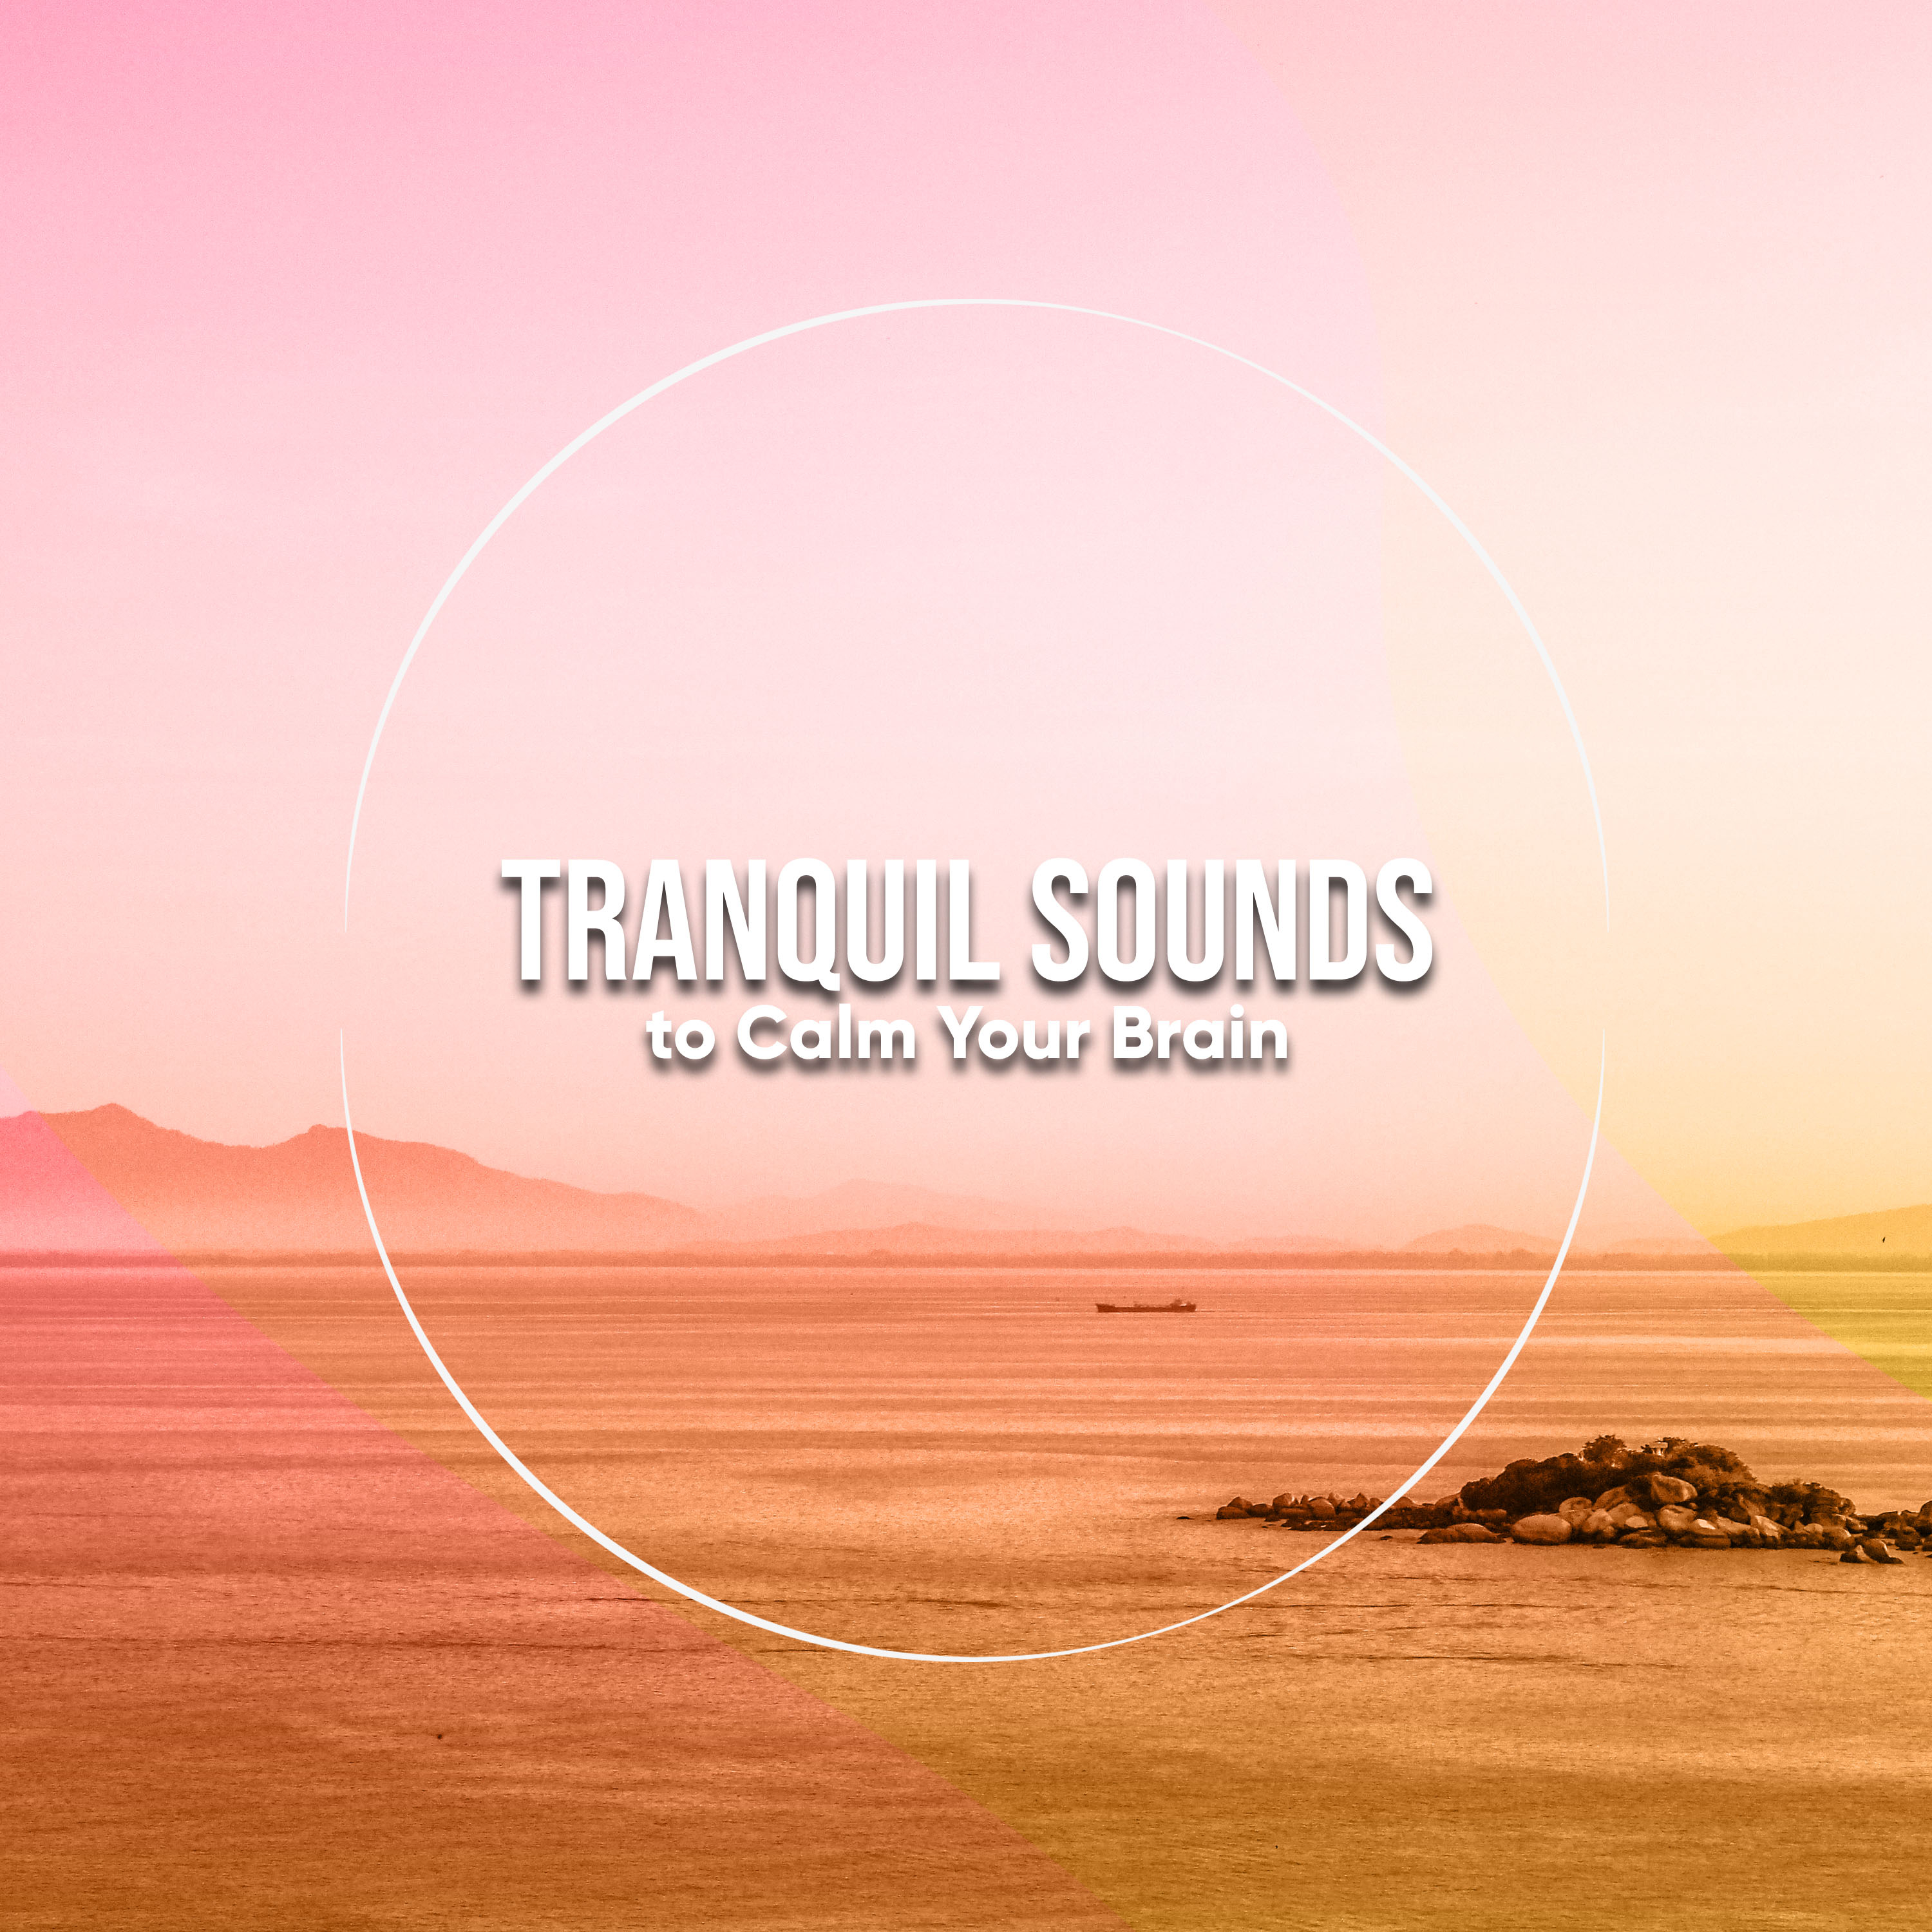 18 Tranquil Sounds to Calm your Brain